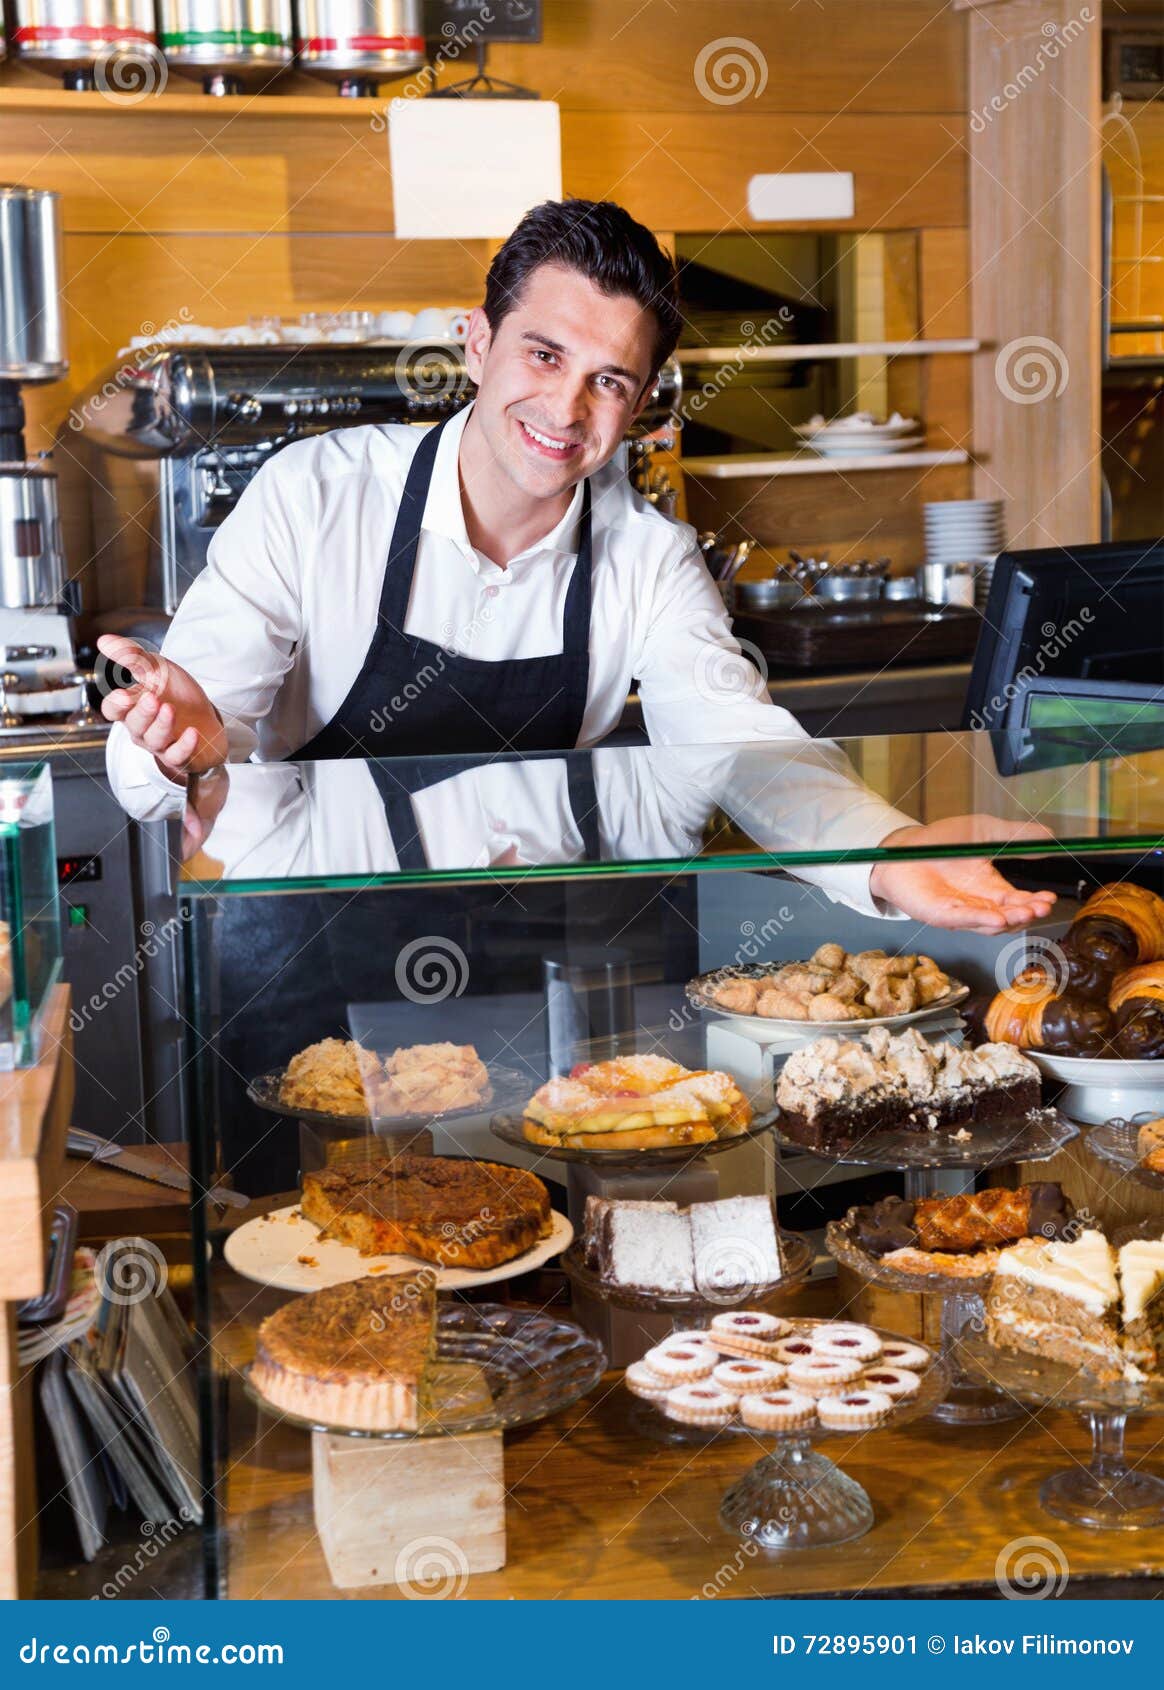 Friendly Positive Smiling Cafe Staff Offering Fancy Stock Image - Image